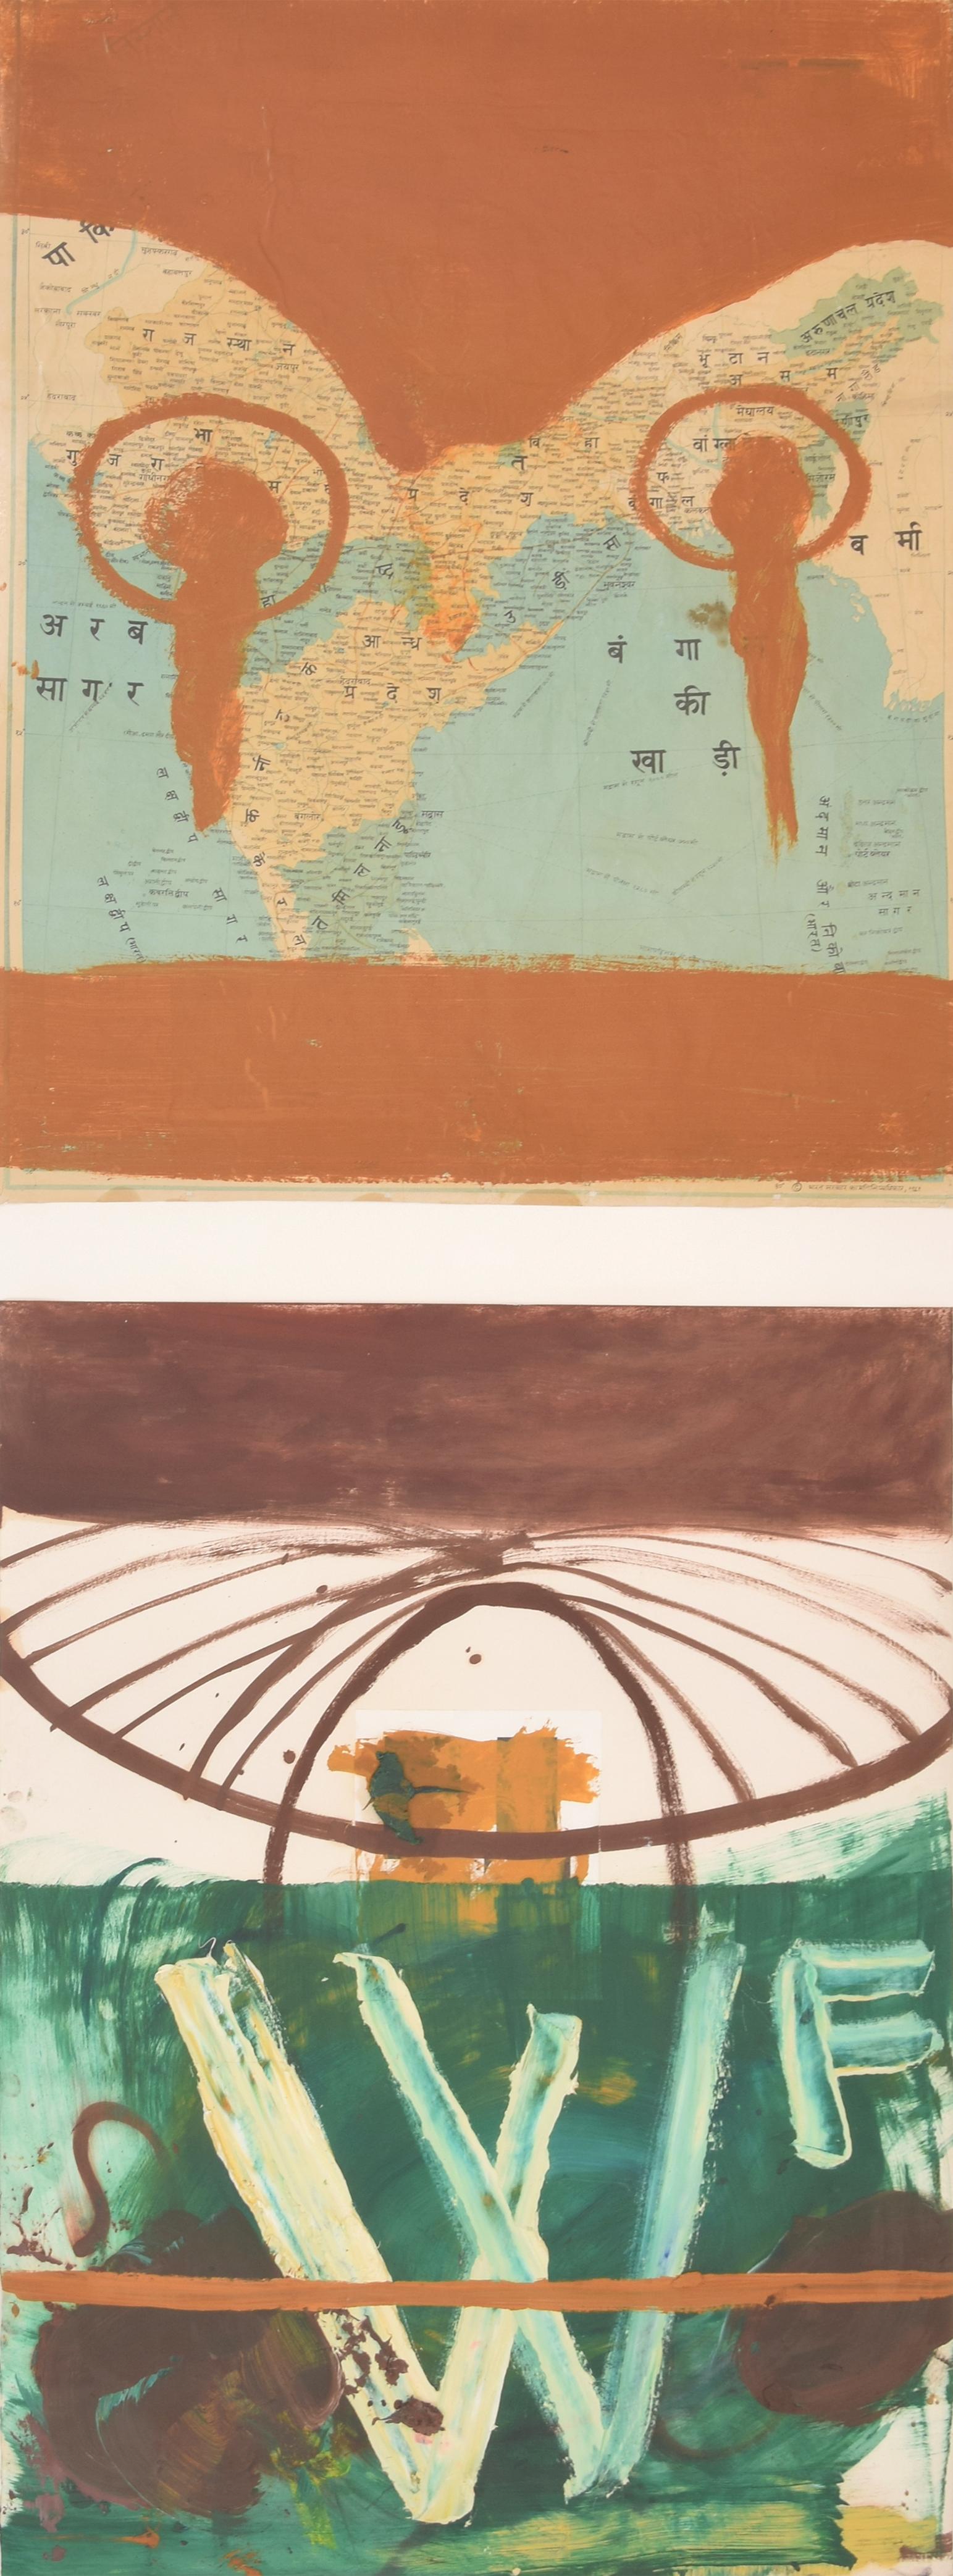 Additional Information: Work is titled “Viva F.” Provenance: Christie’s auction #6242 lot 27  Private Collection, Boston, Massachusetts, acquired 1986.

Marking(s); notes: signed, marking(s); 1985

Country of origin; materials: USA; oil on map and